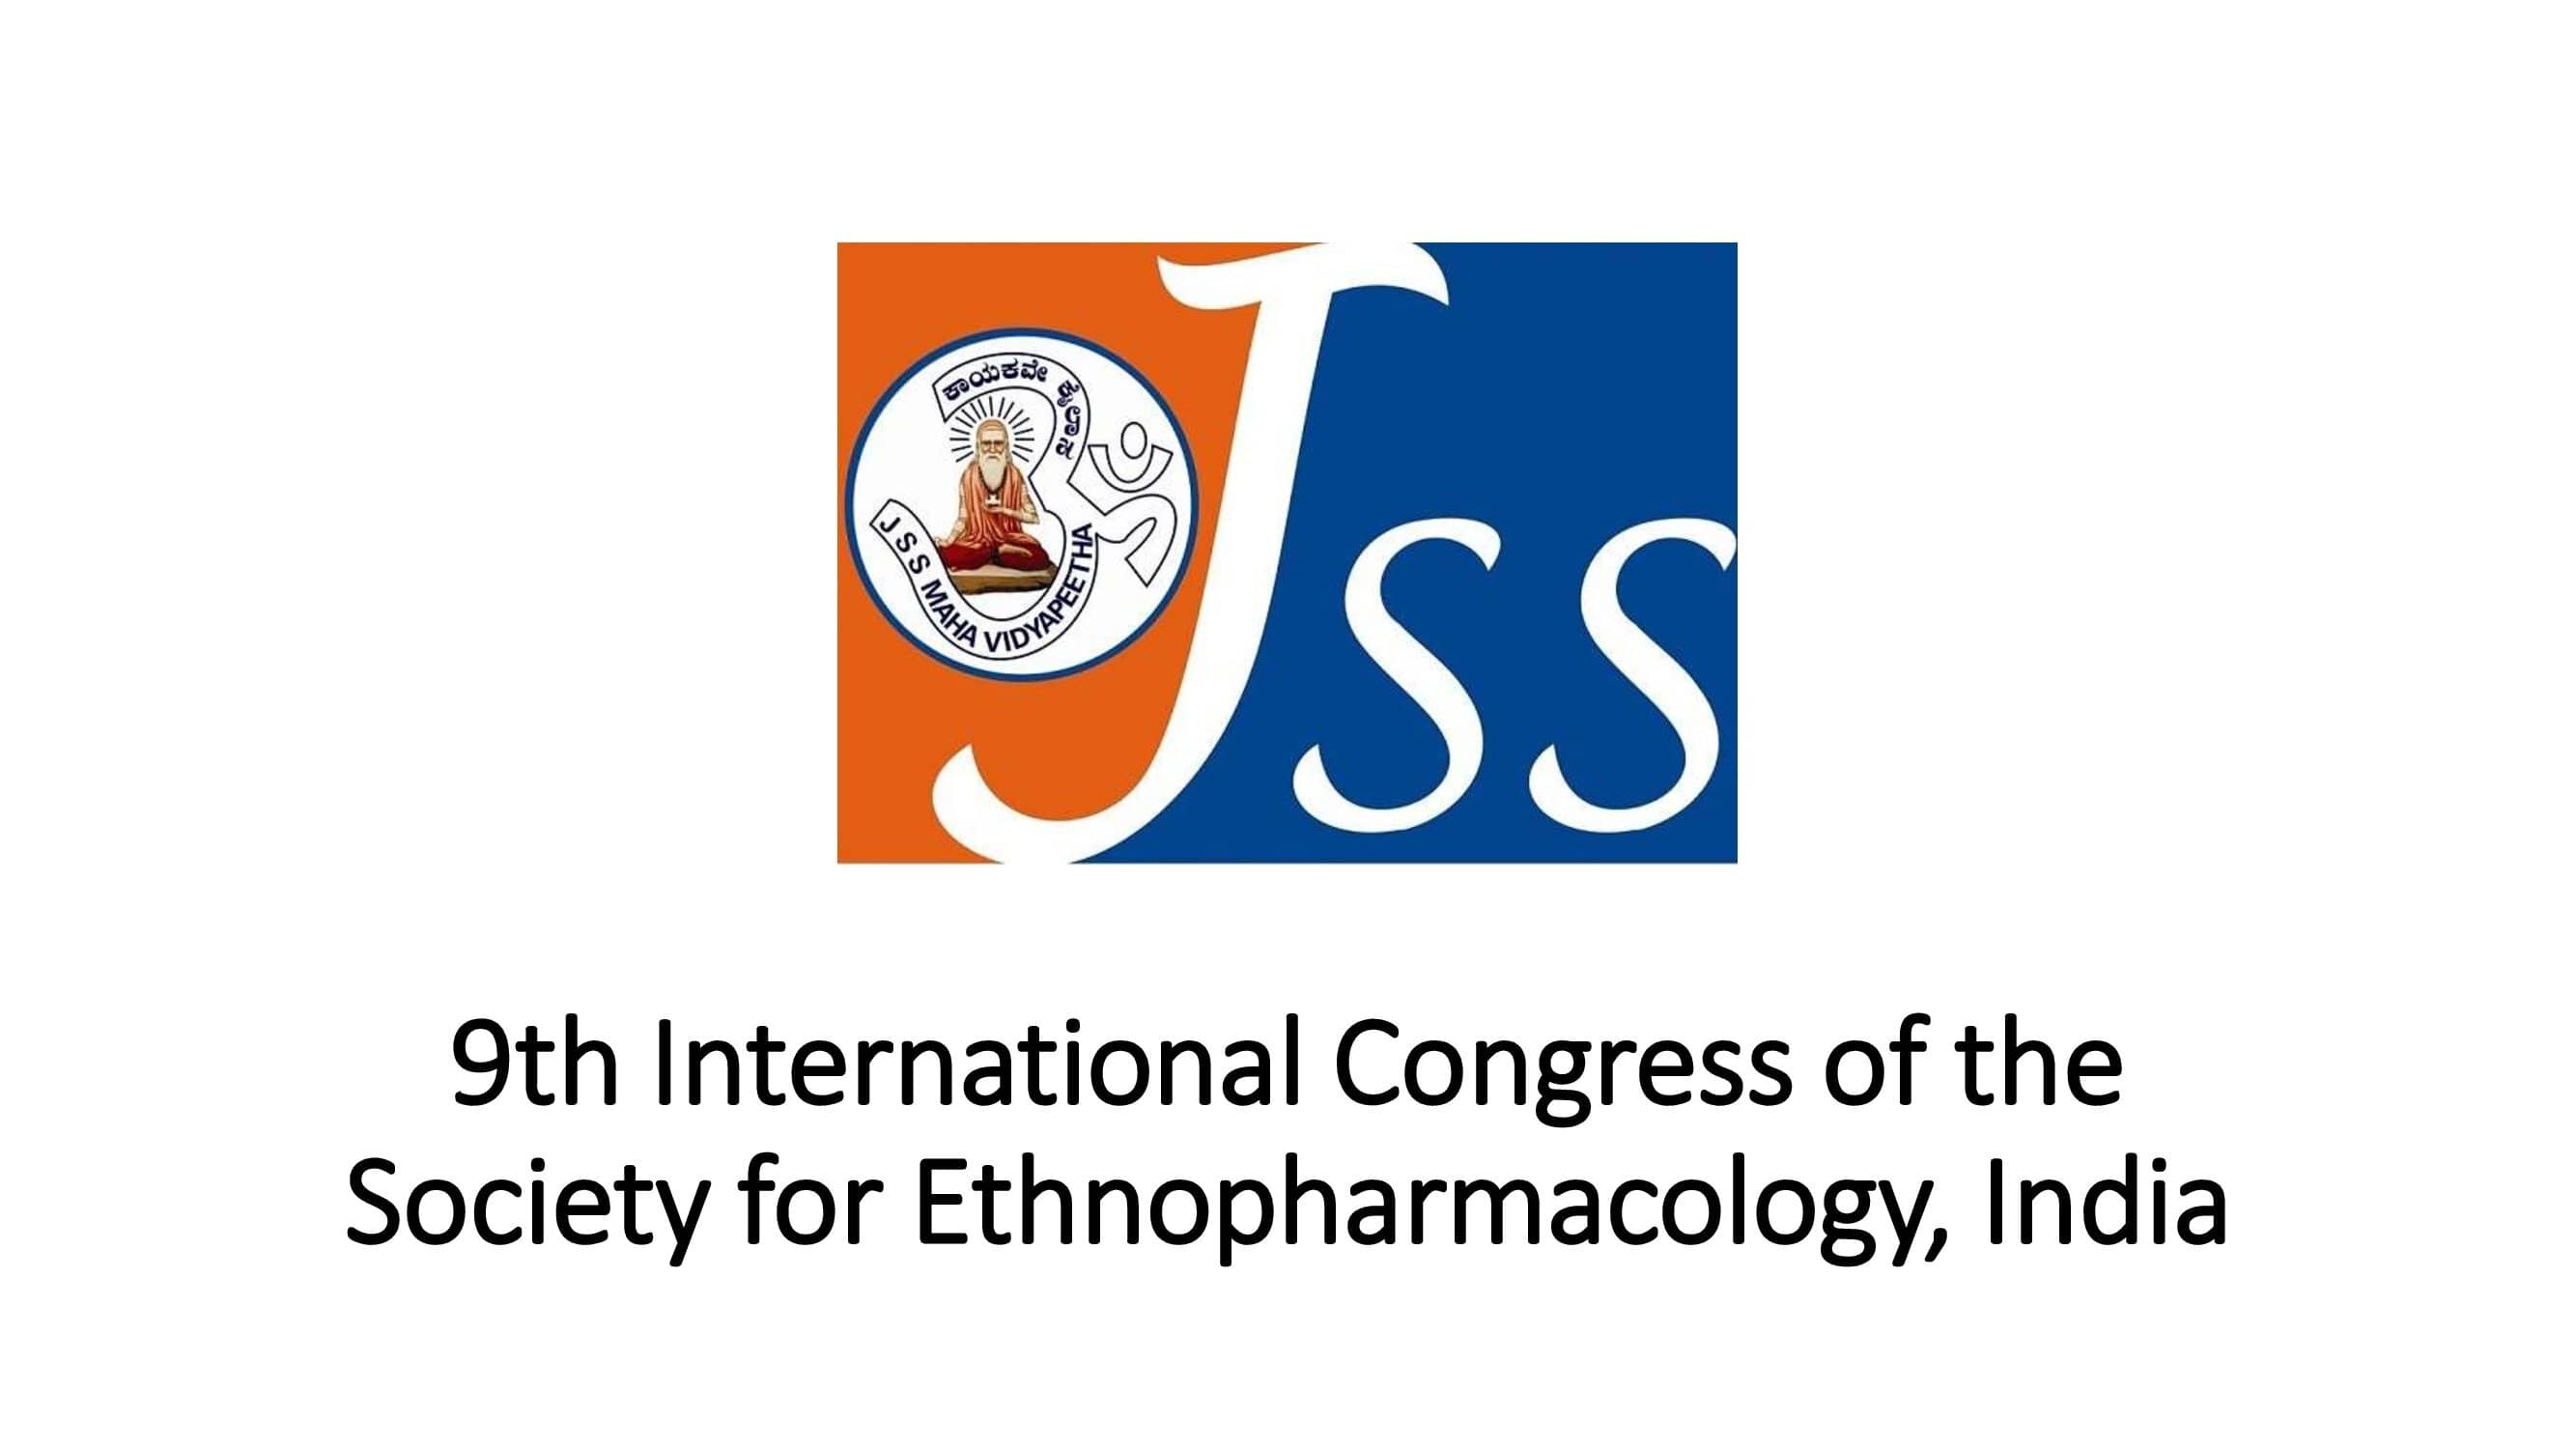 9th International Congress of the Society for Ethnopharmacology, India